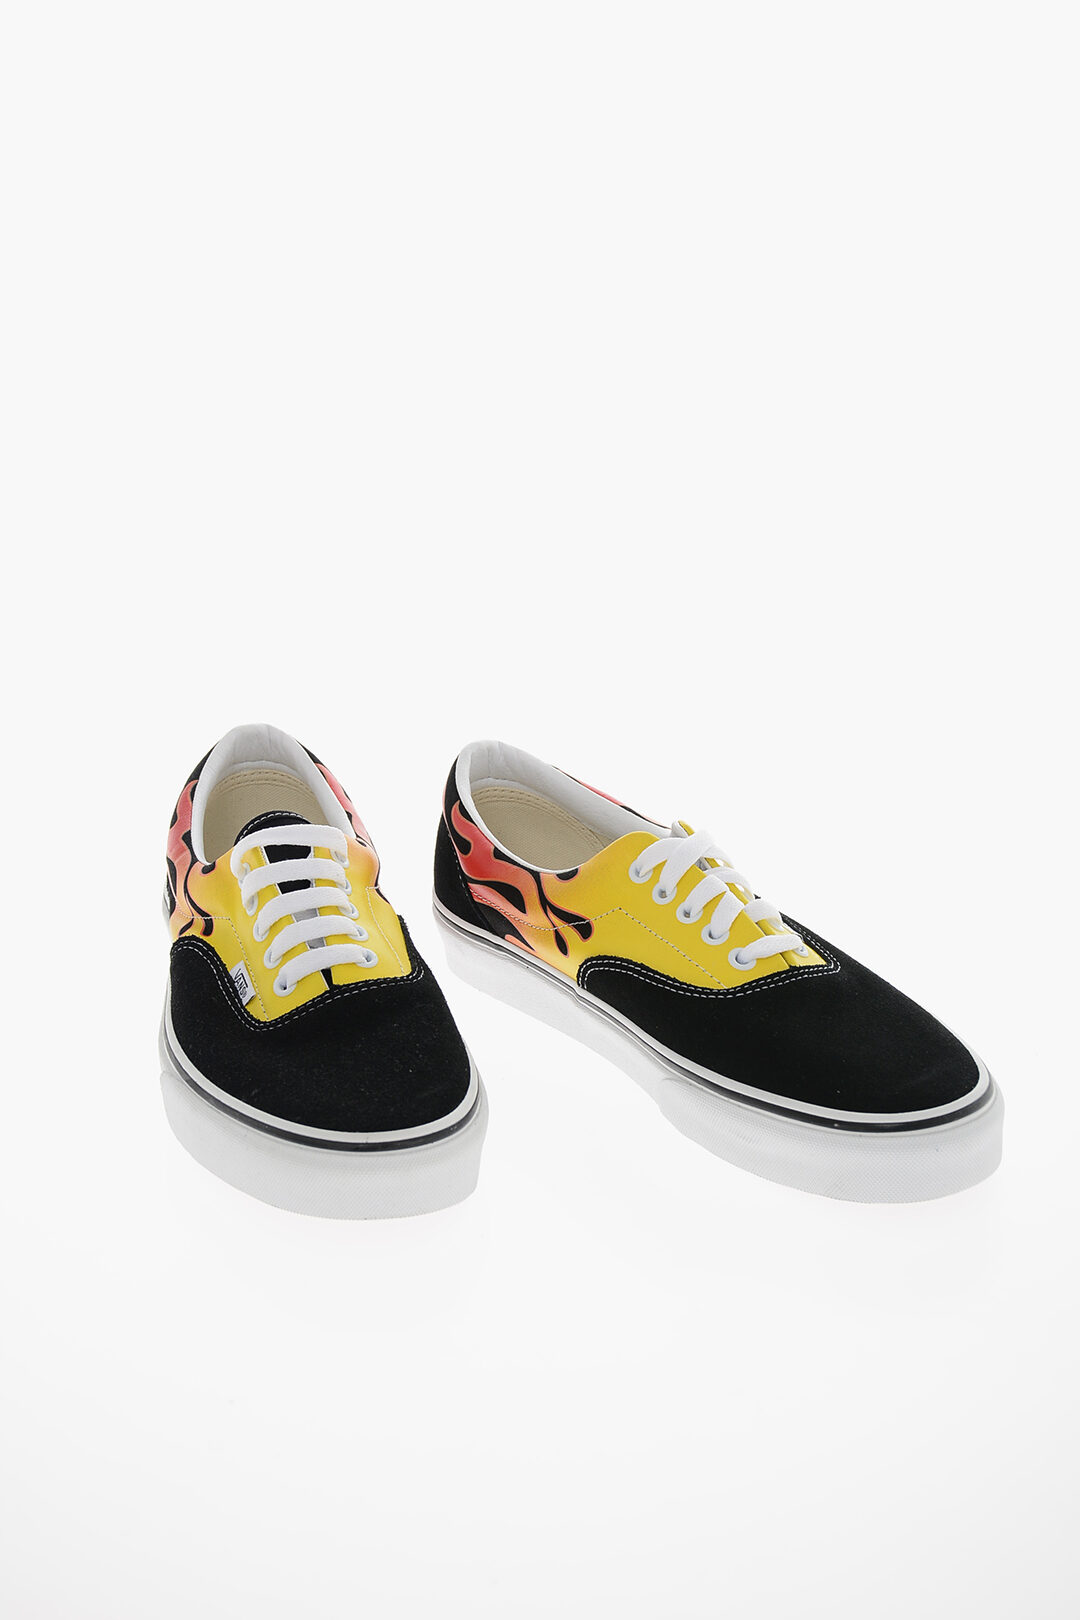 Vans Printed Leather and Fabric ERA Sneakers men - Glamood Outlet